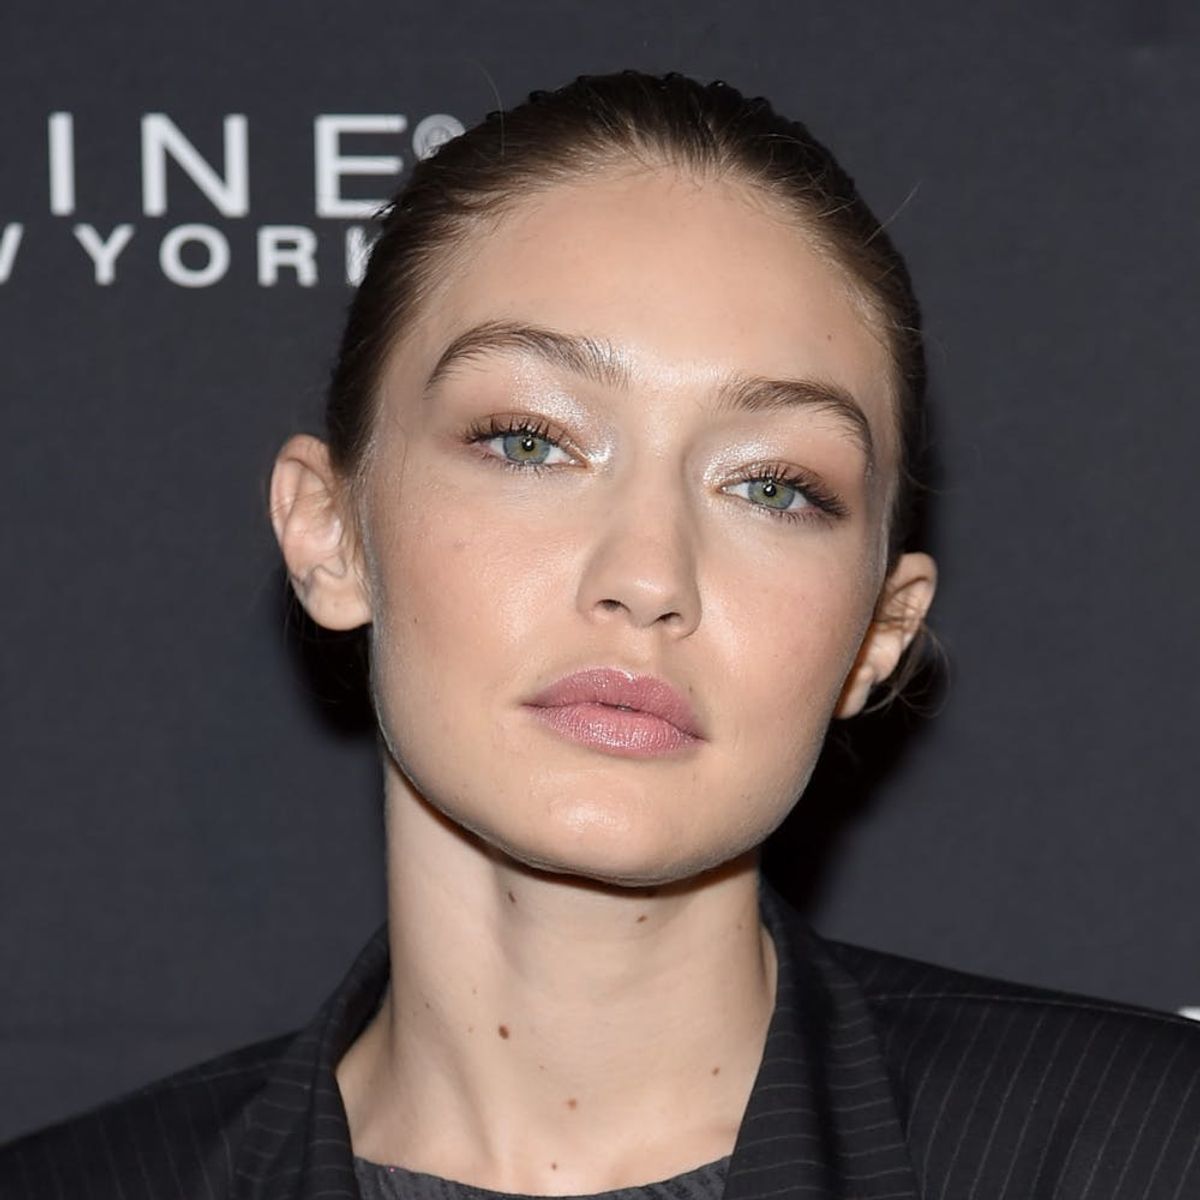 Gigi Hadid Has Something to Say to Body Shamers Who Criticized Her During NYFW